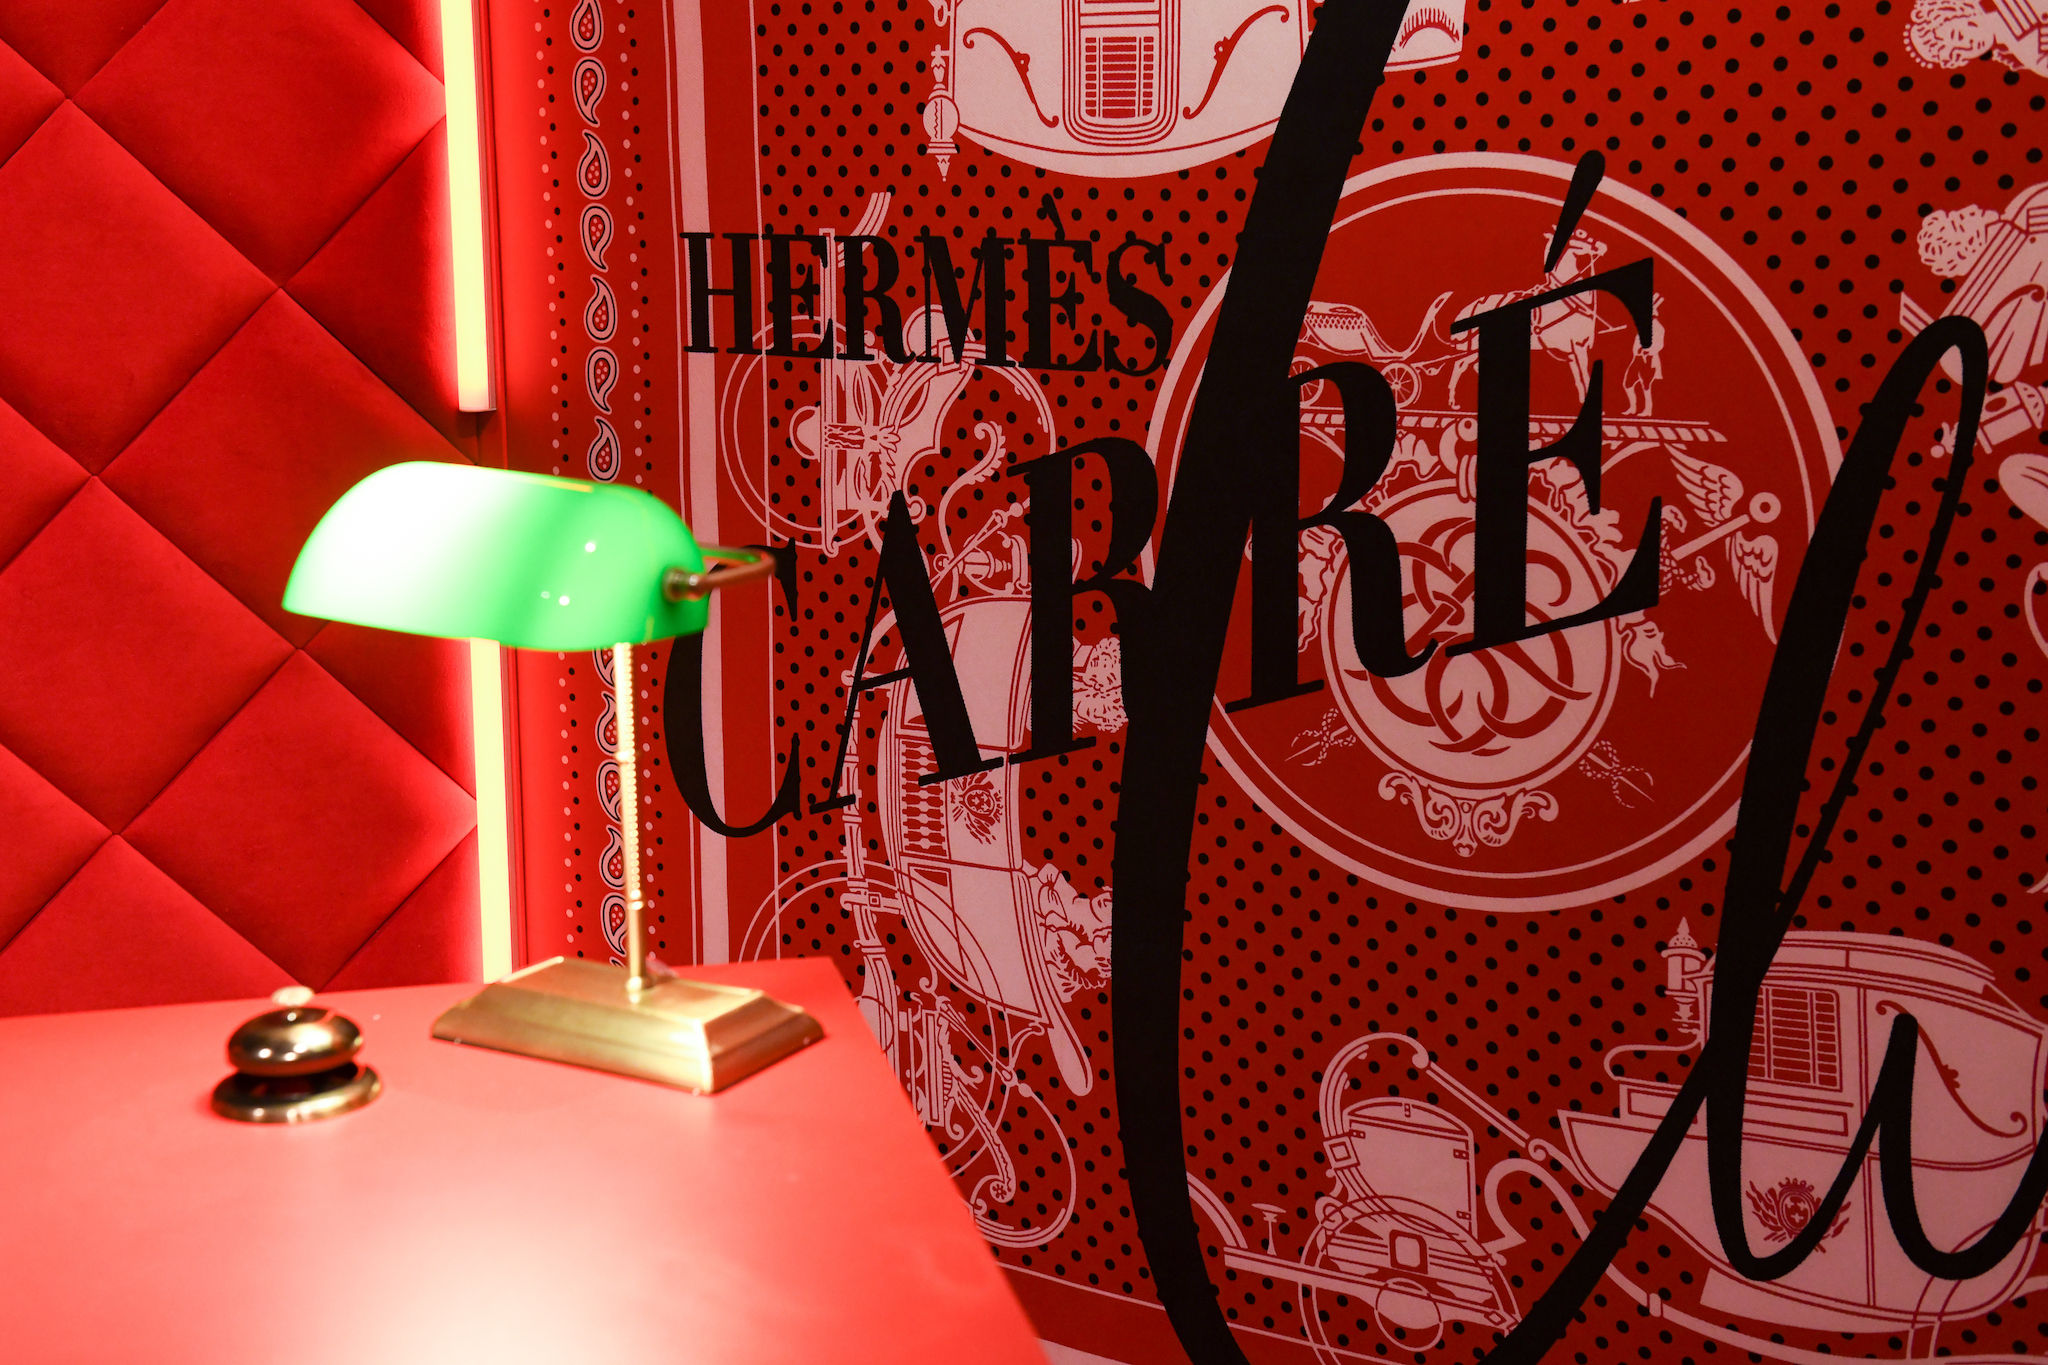 Hermès Carré Club Pays Tribute To The Iconic Silk Scarf With An Immersive Pop-Up